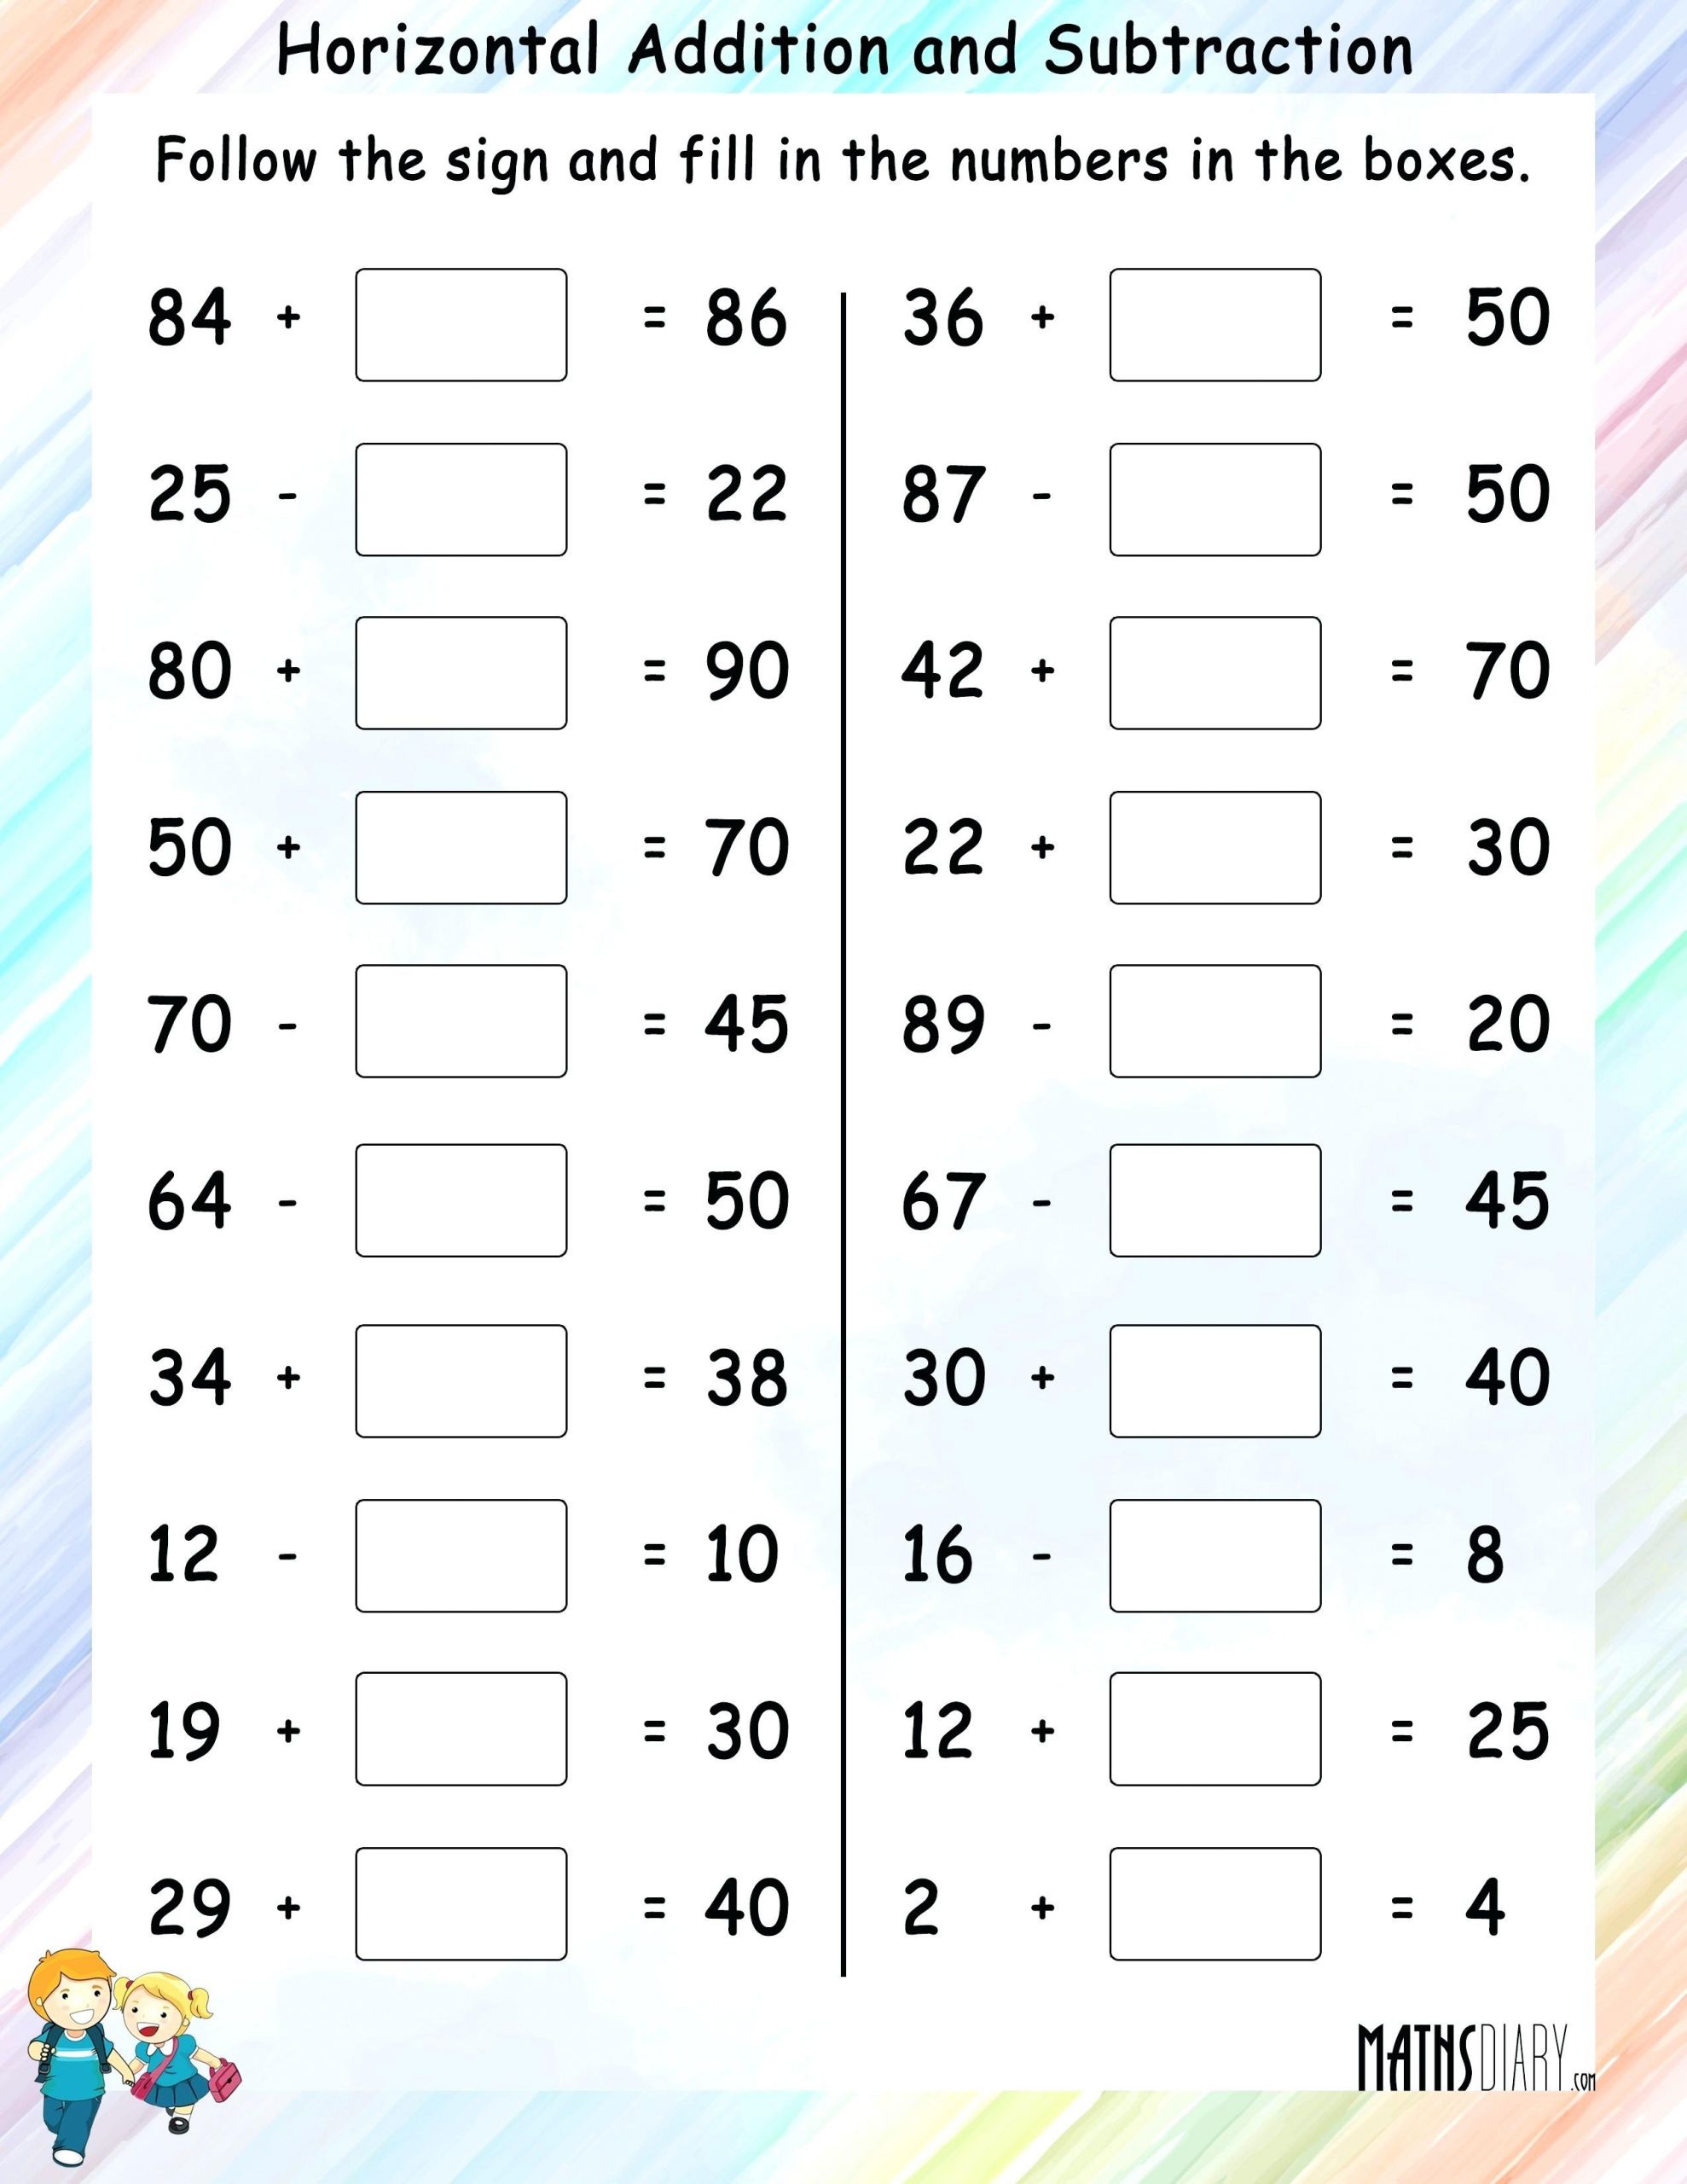 4 Free Math Worksheets Second Grade 2 Addition Add In Columns Missing